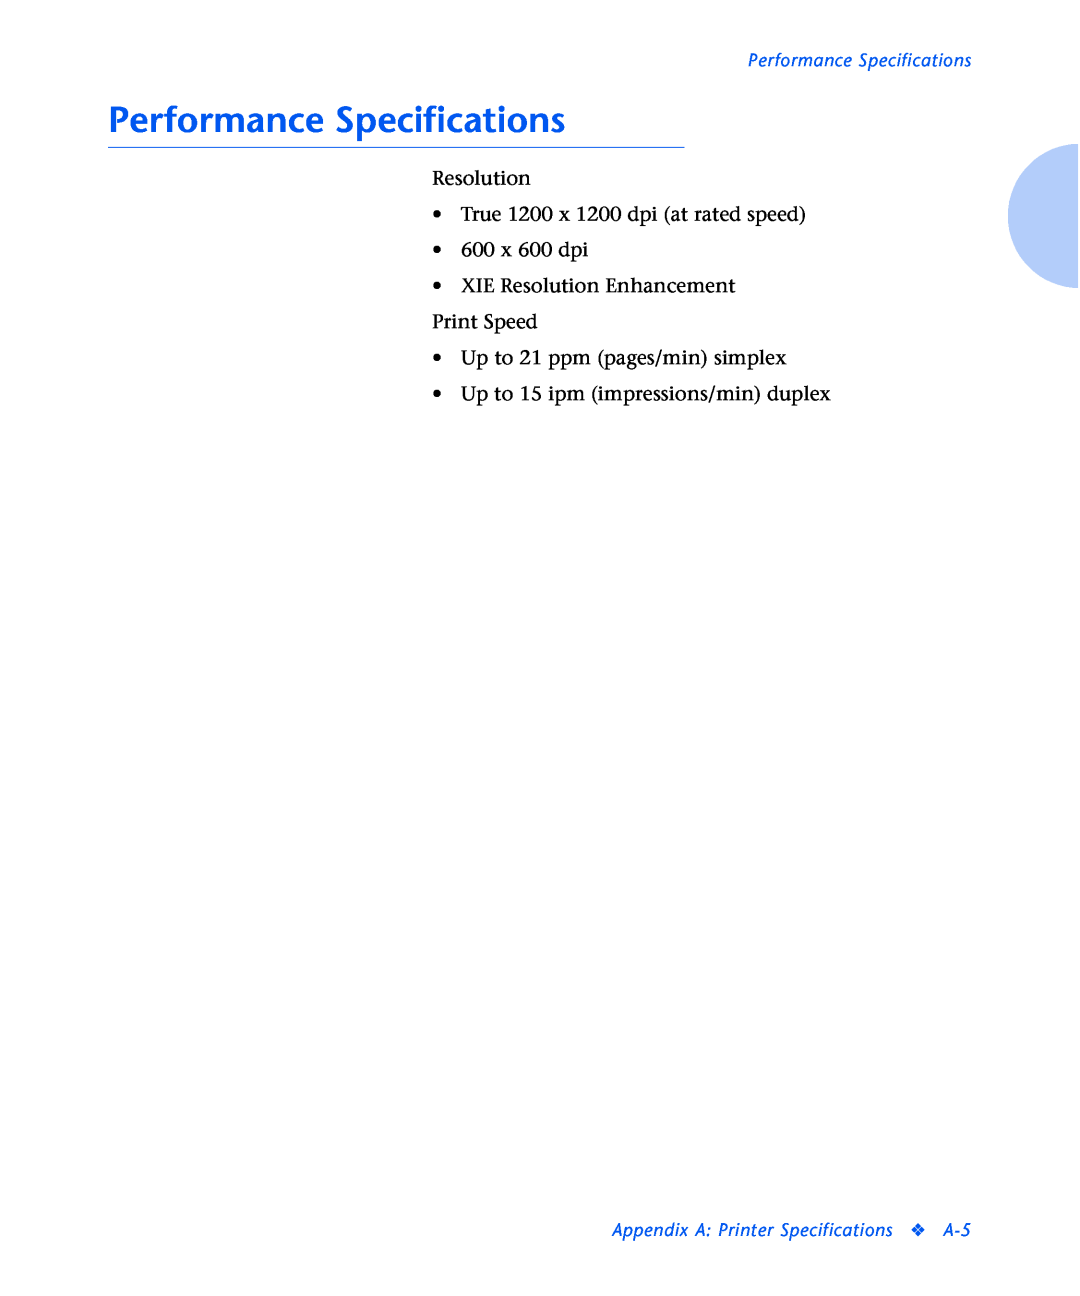 Xerox N2125 manual Performance Specifications, Resolution True 1200 x 1200 dpi at rated speed 600 x 600 dpi 